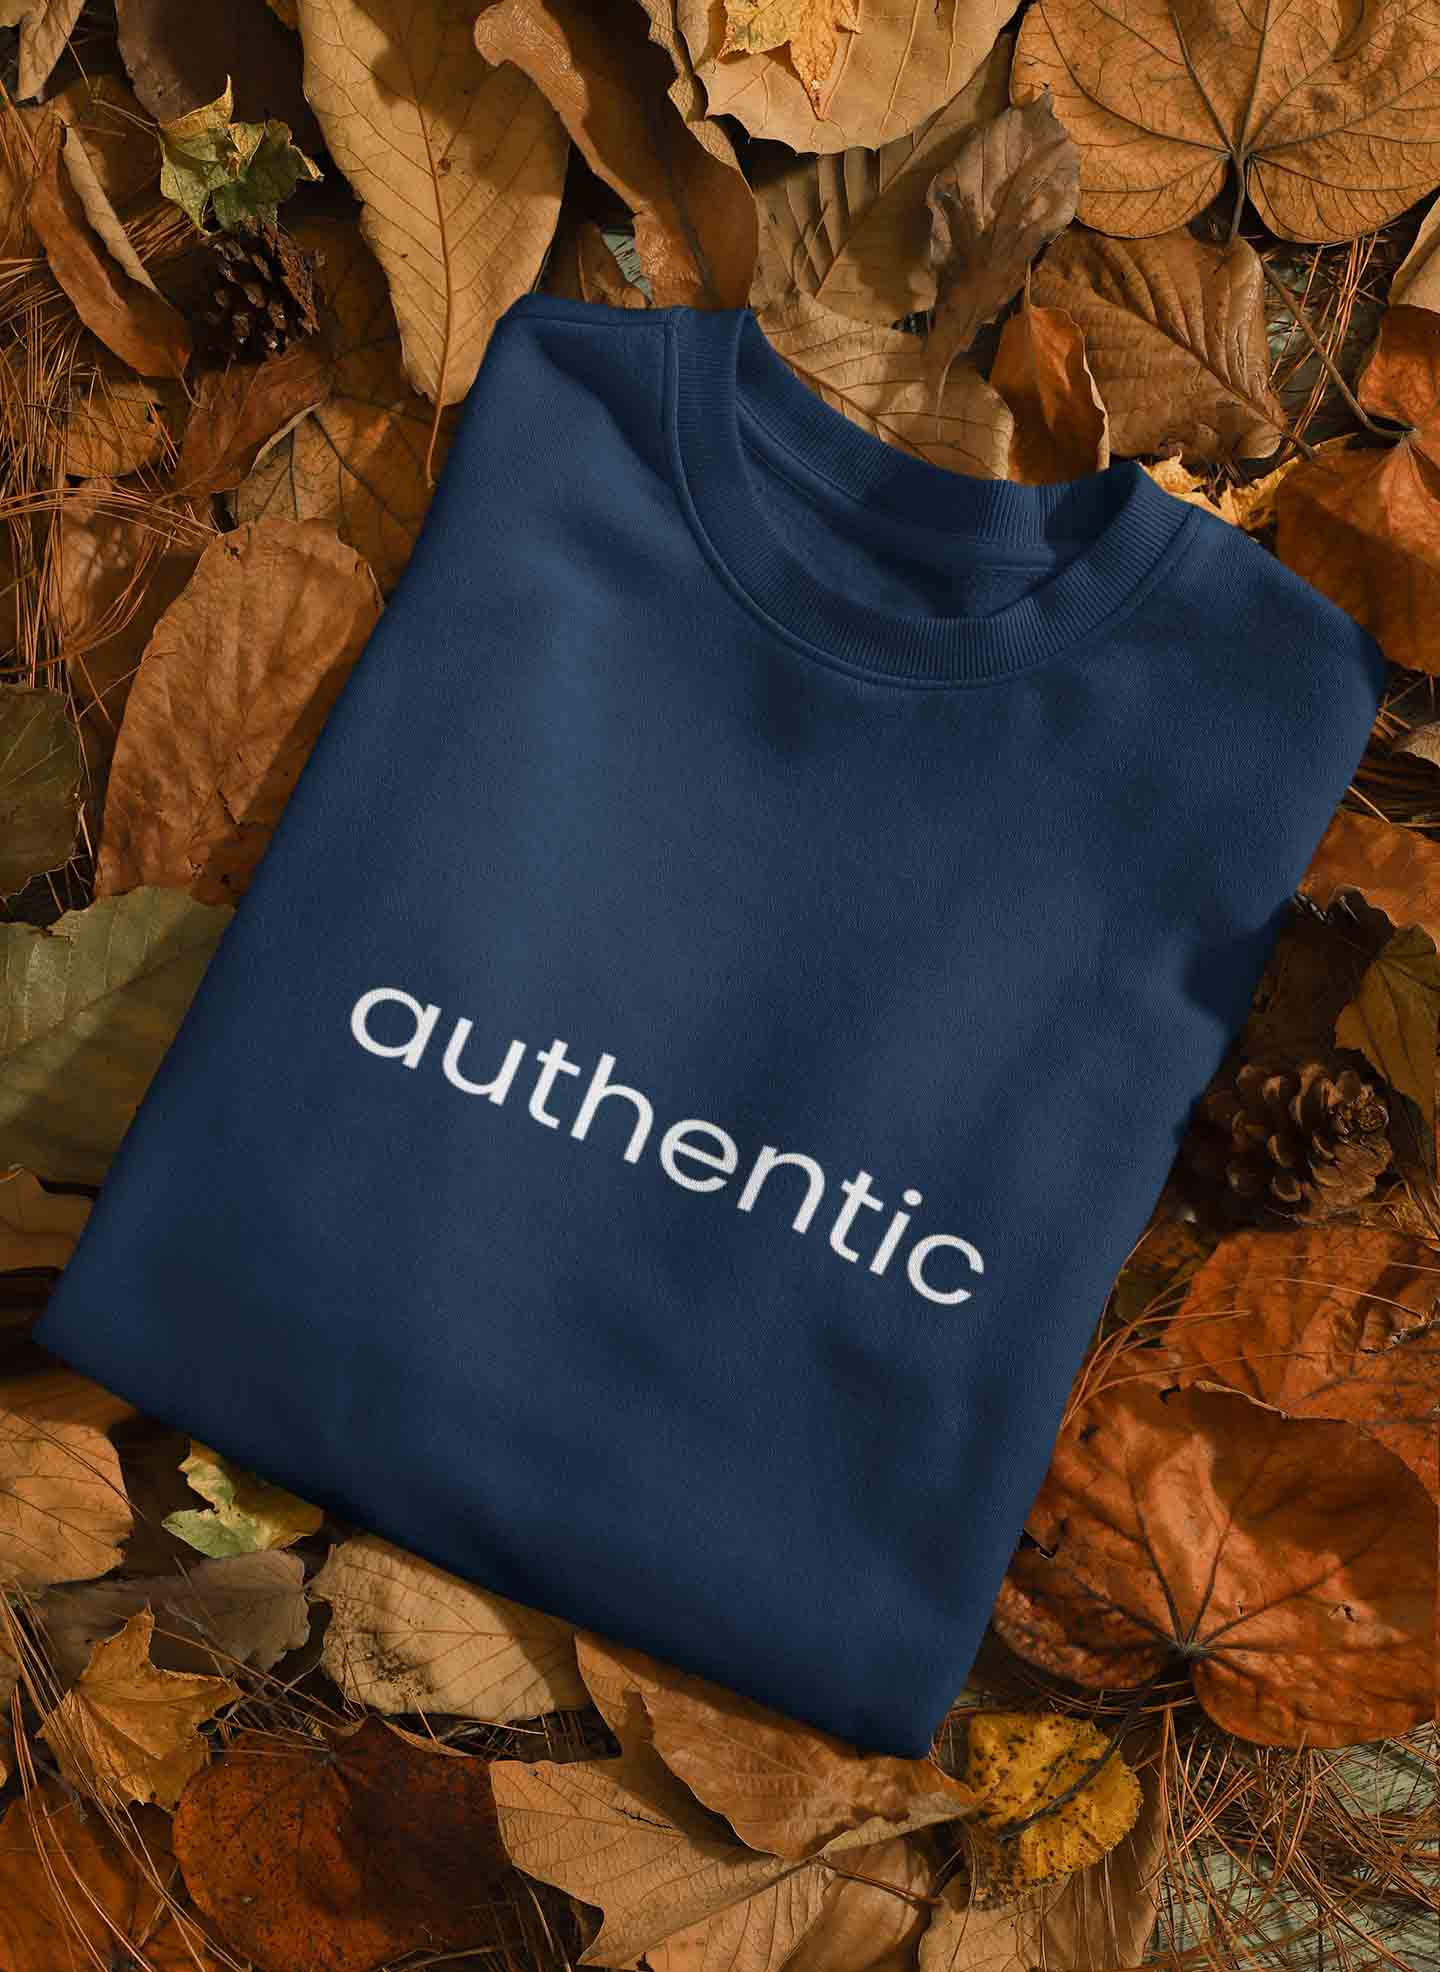 authentic navy blue printed t shirt for men